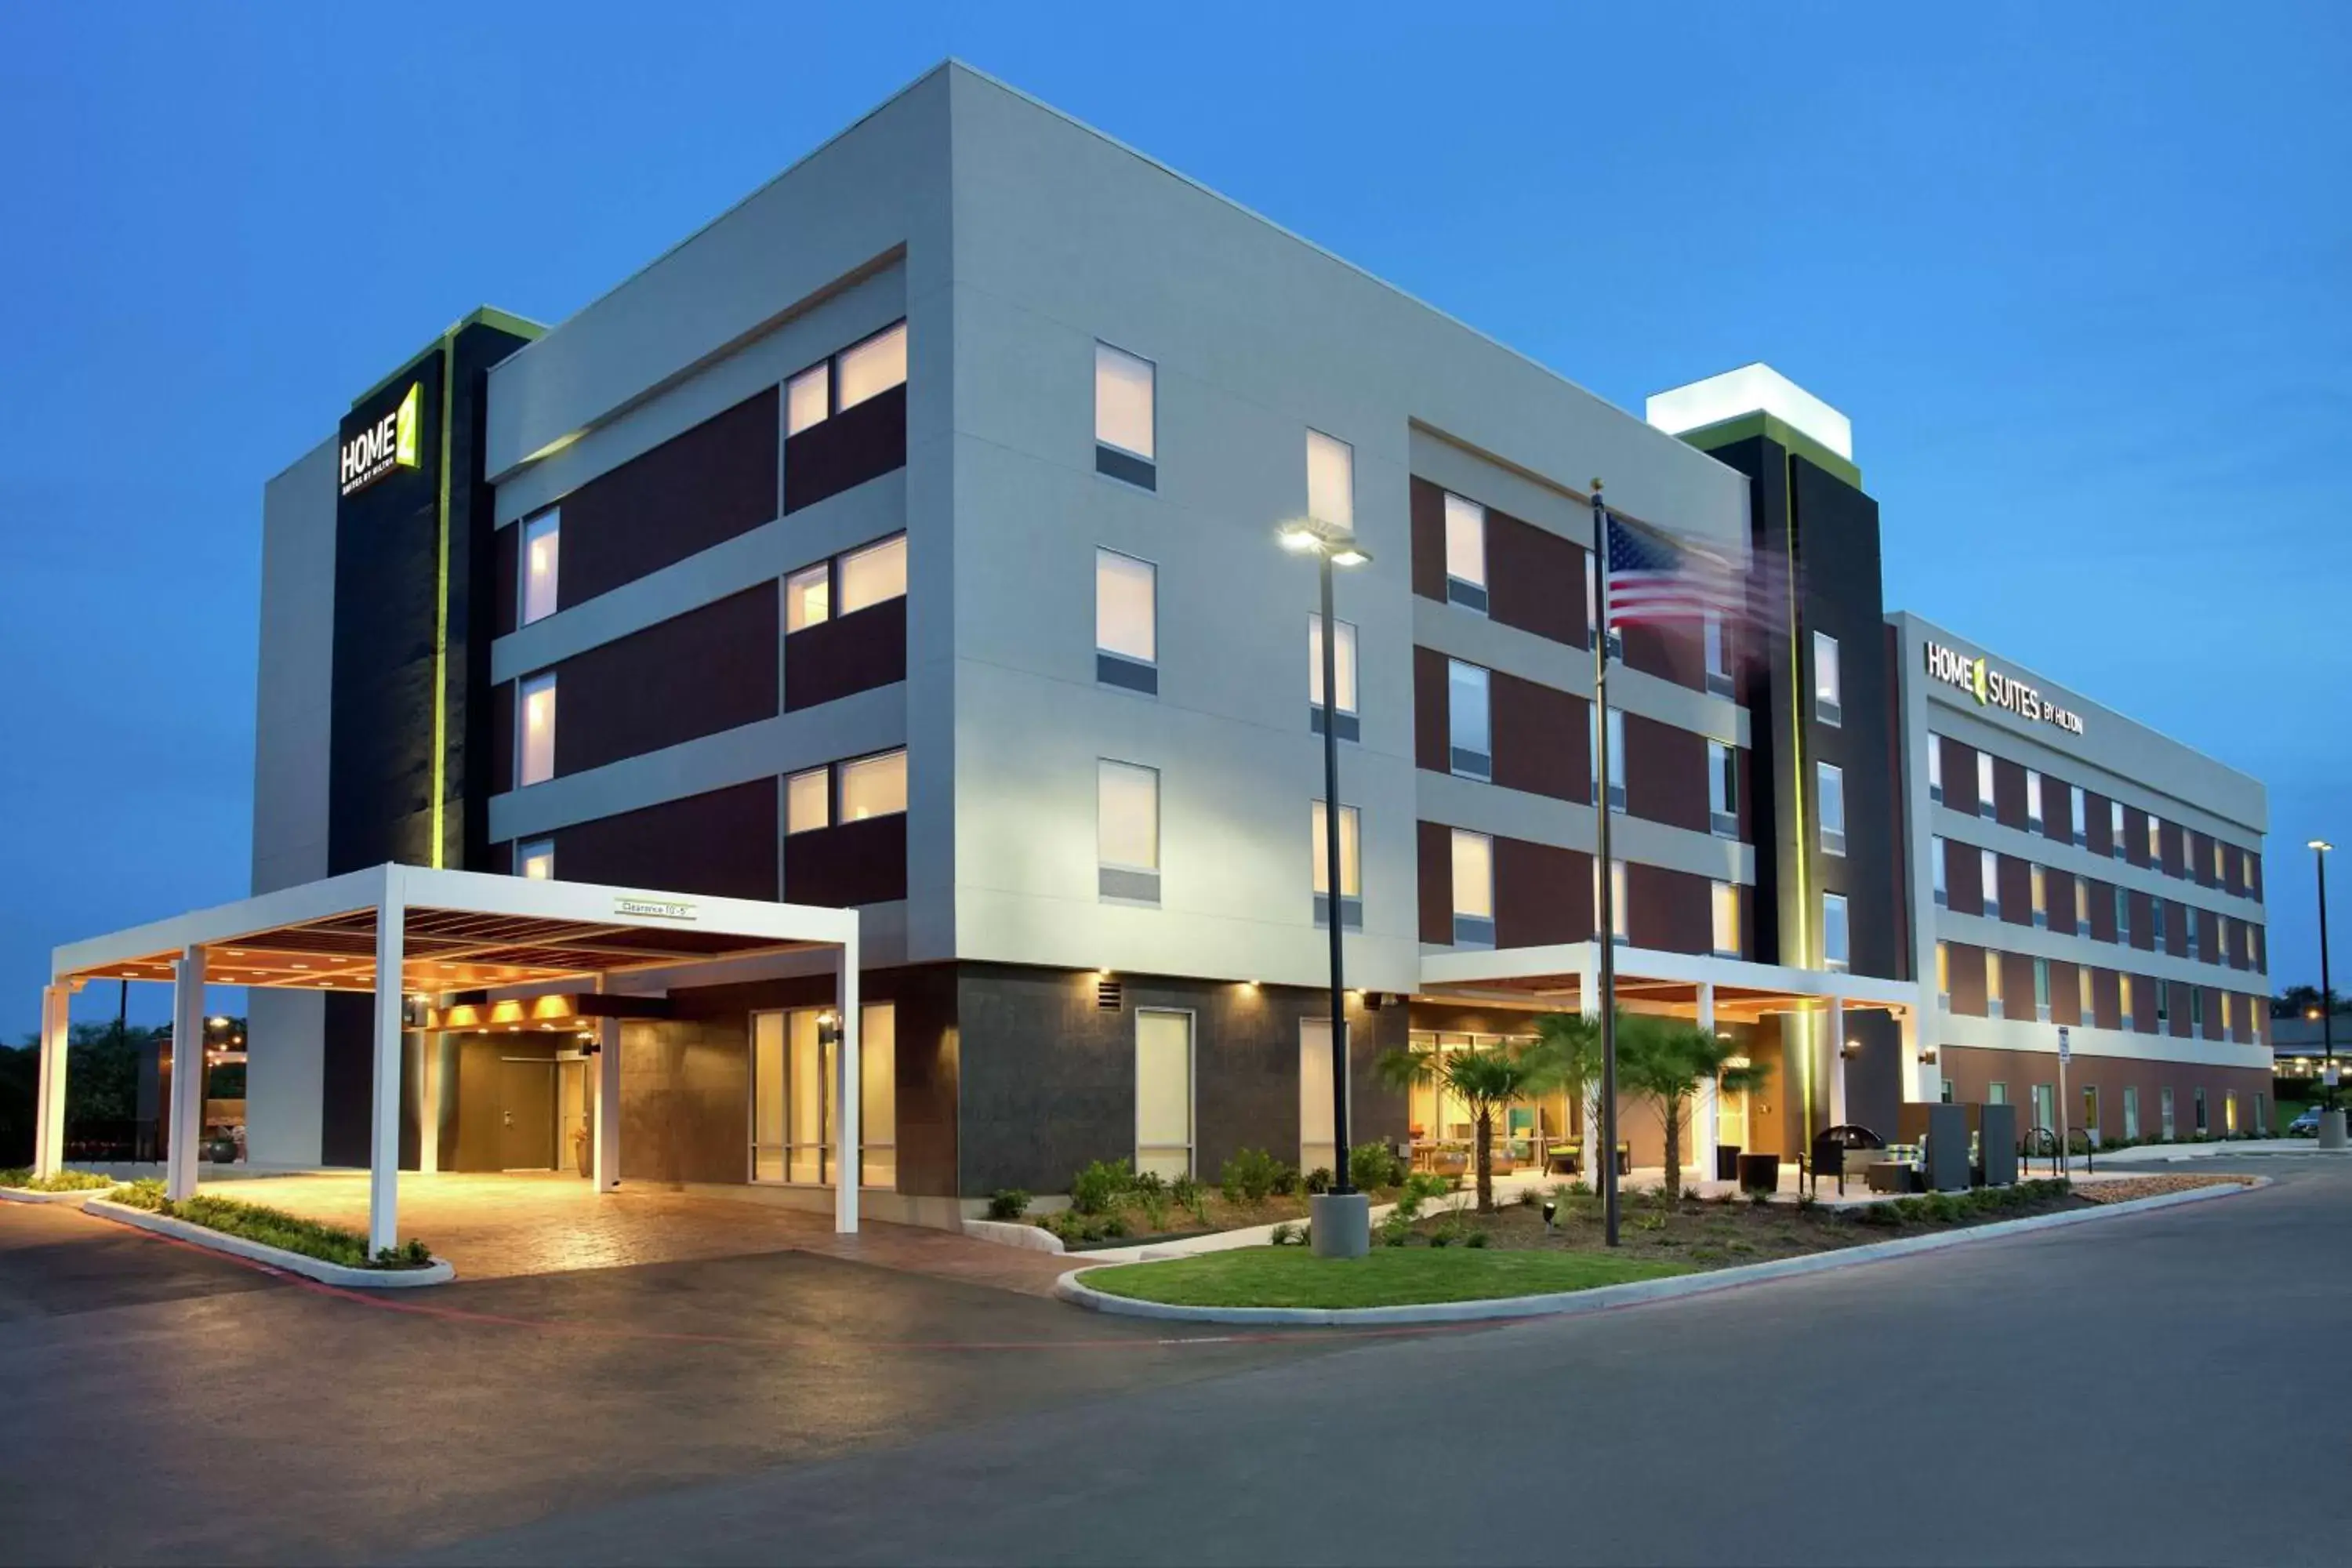 Property Building in Home2 Suites by Hilton San Antonio Airport, TX